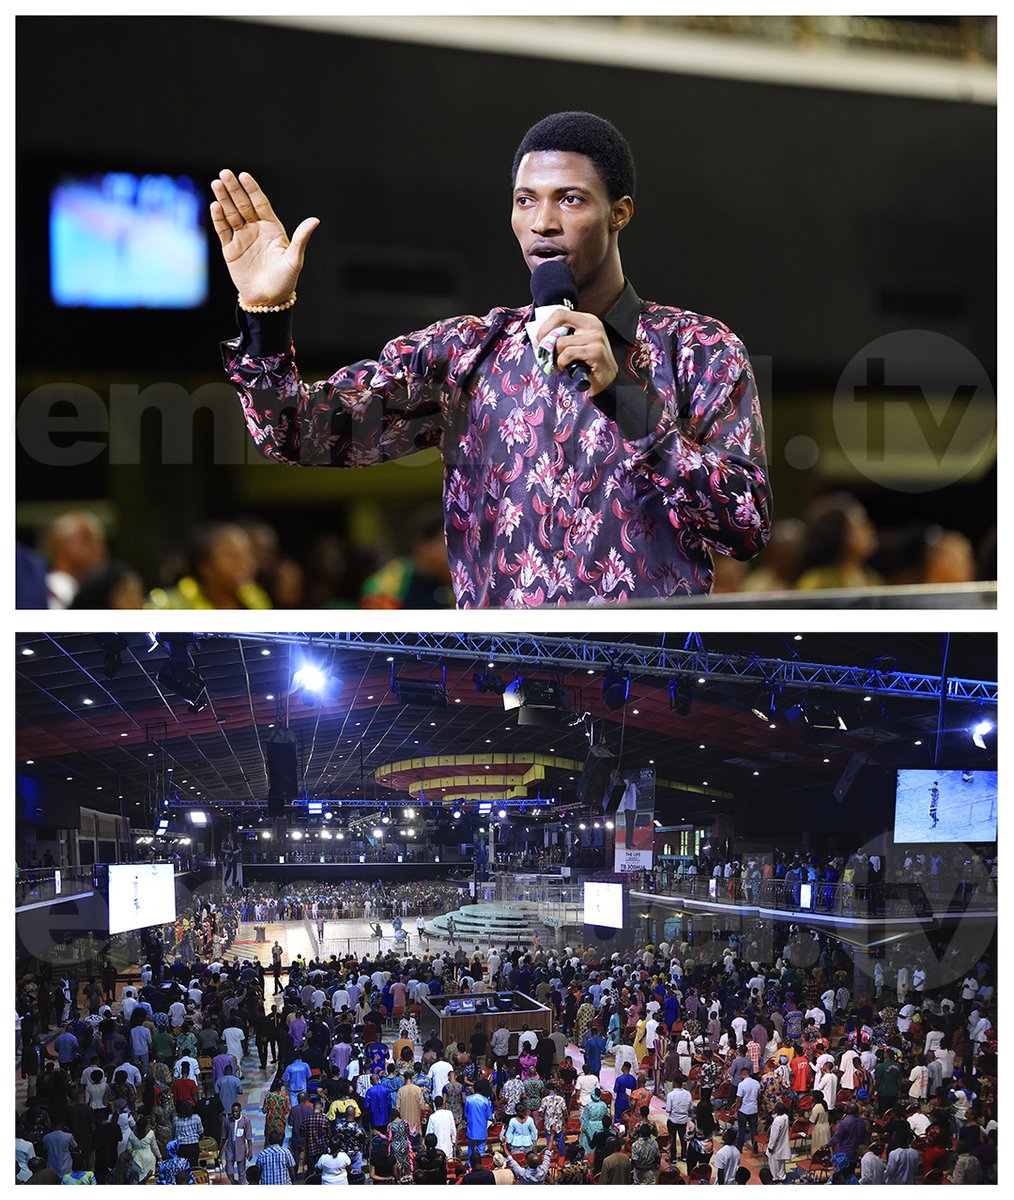 Evangelist Joseph tells the people to say: “Lord Jesus, my heart is ready. My spirit is ready. My soul is ready. My body is ready. Come and deliver me! Come and set me free! O Holy Spirit, come and touch me!” He also prays: “We command every demon, familiar spirit, contrary